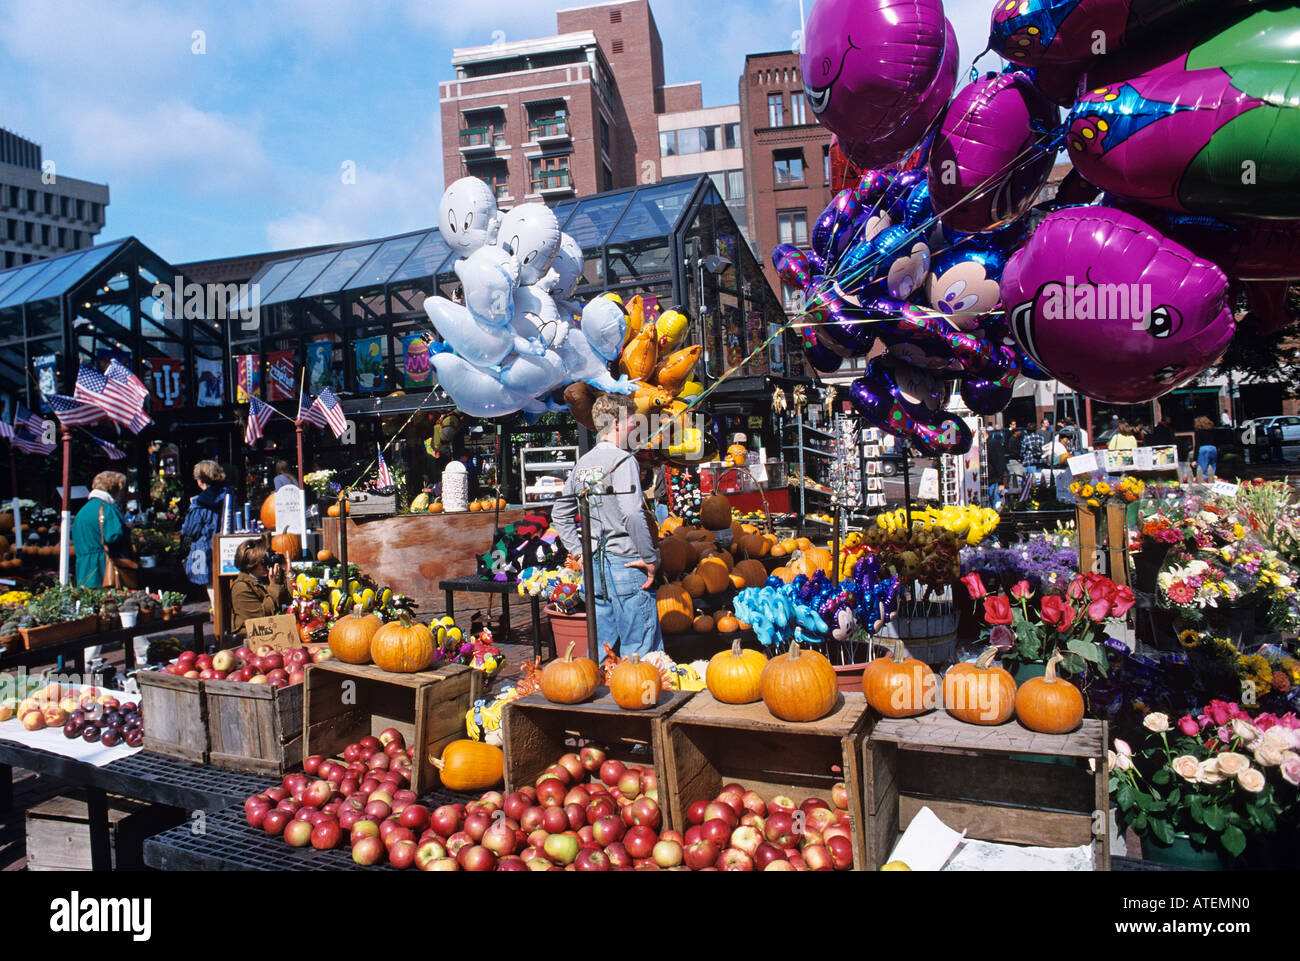 Boston s Quincy Market selling fresh fruit flowers and more in area surrounding the city s Faneuil Hall Boston s old public meeting place Stock Photo